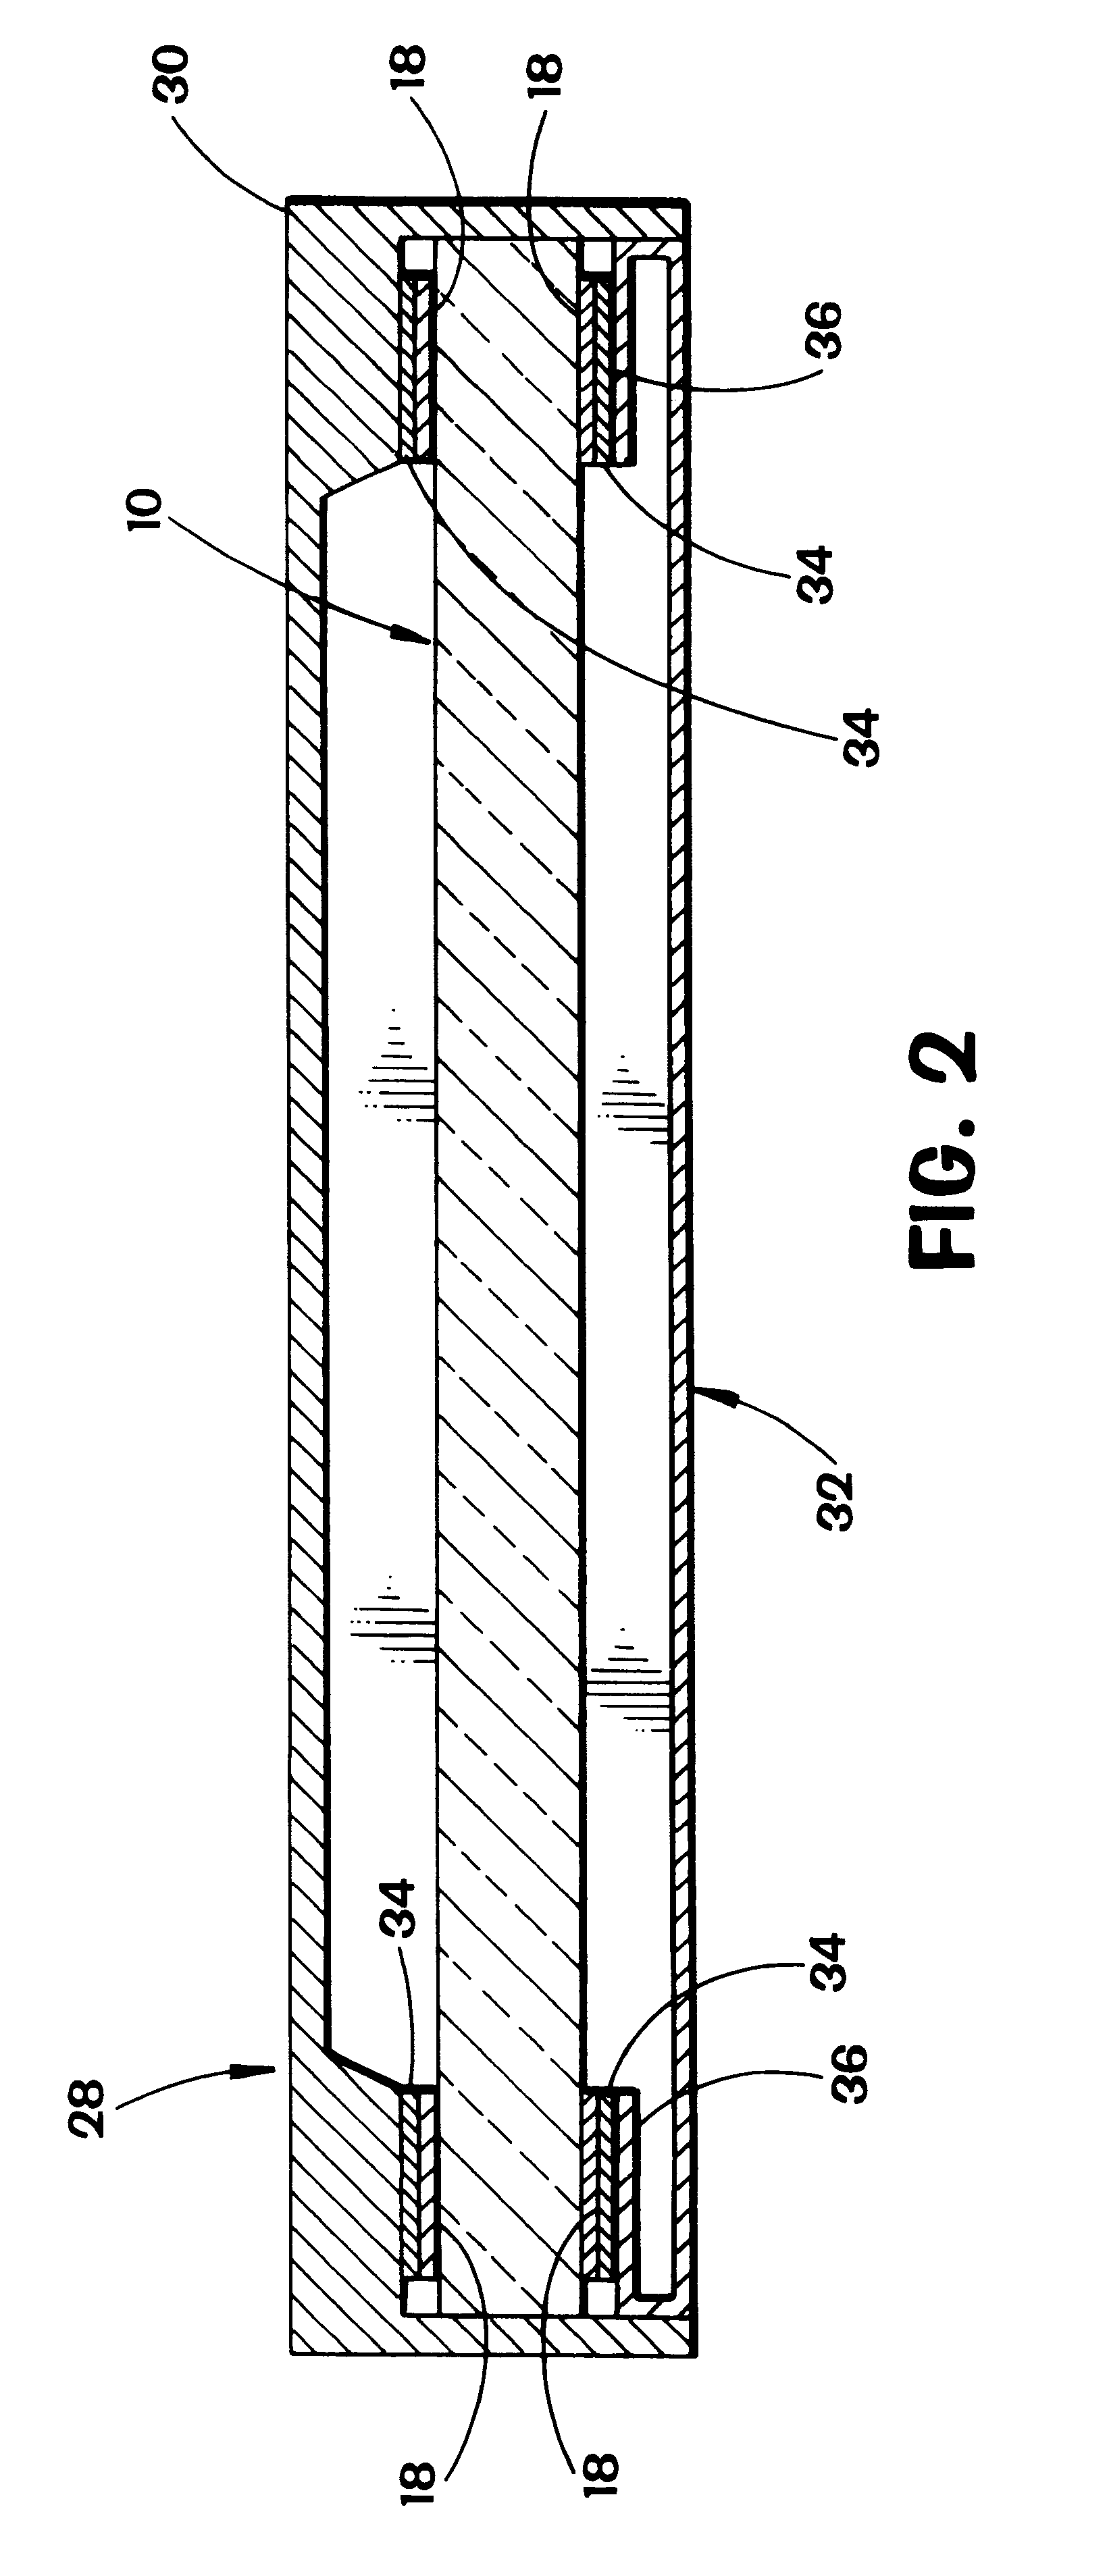 Substrate for reducing electromagnetic interference and enclosure